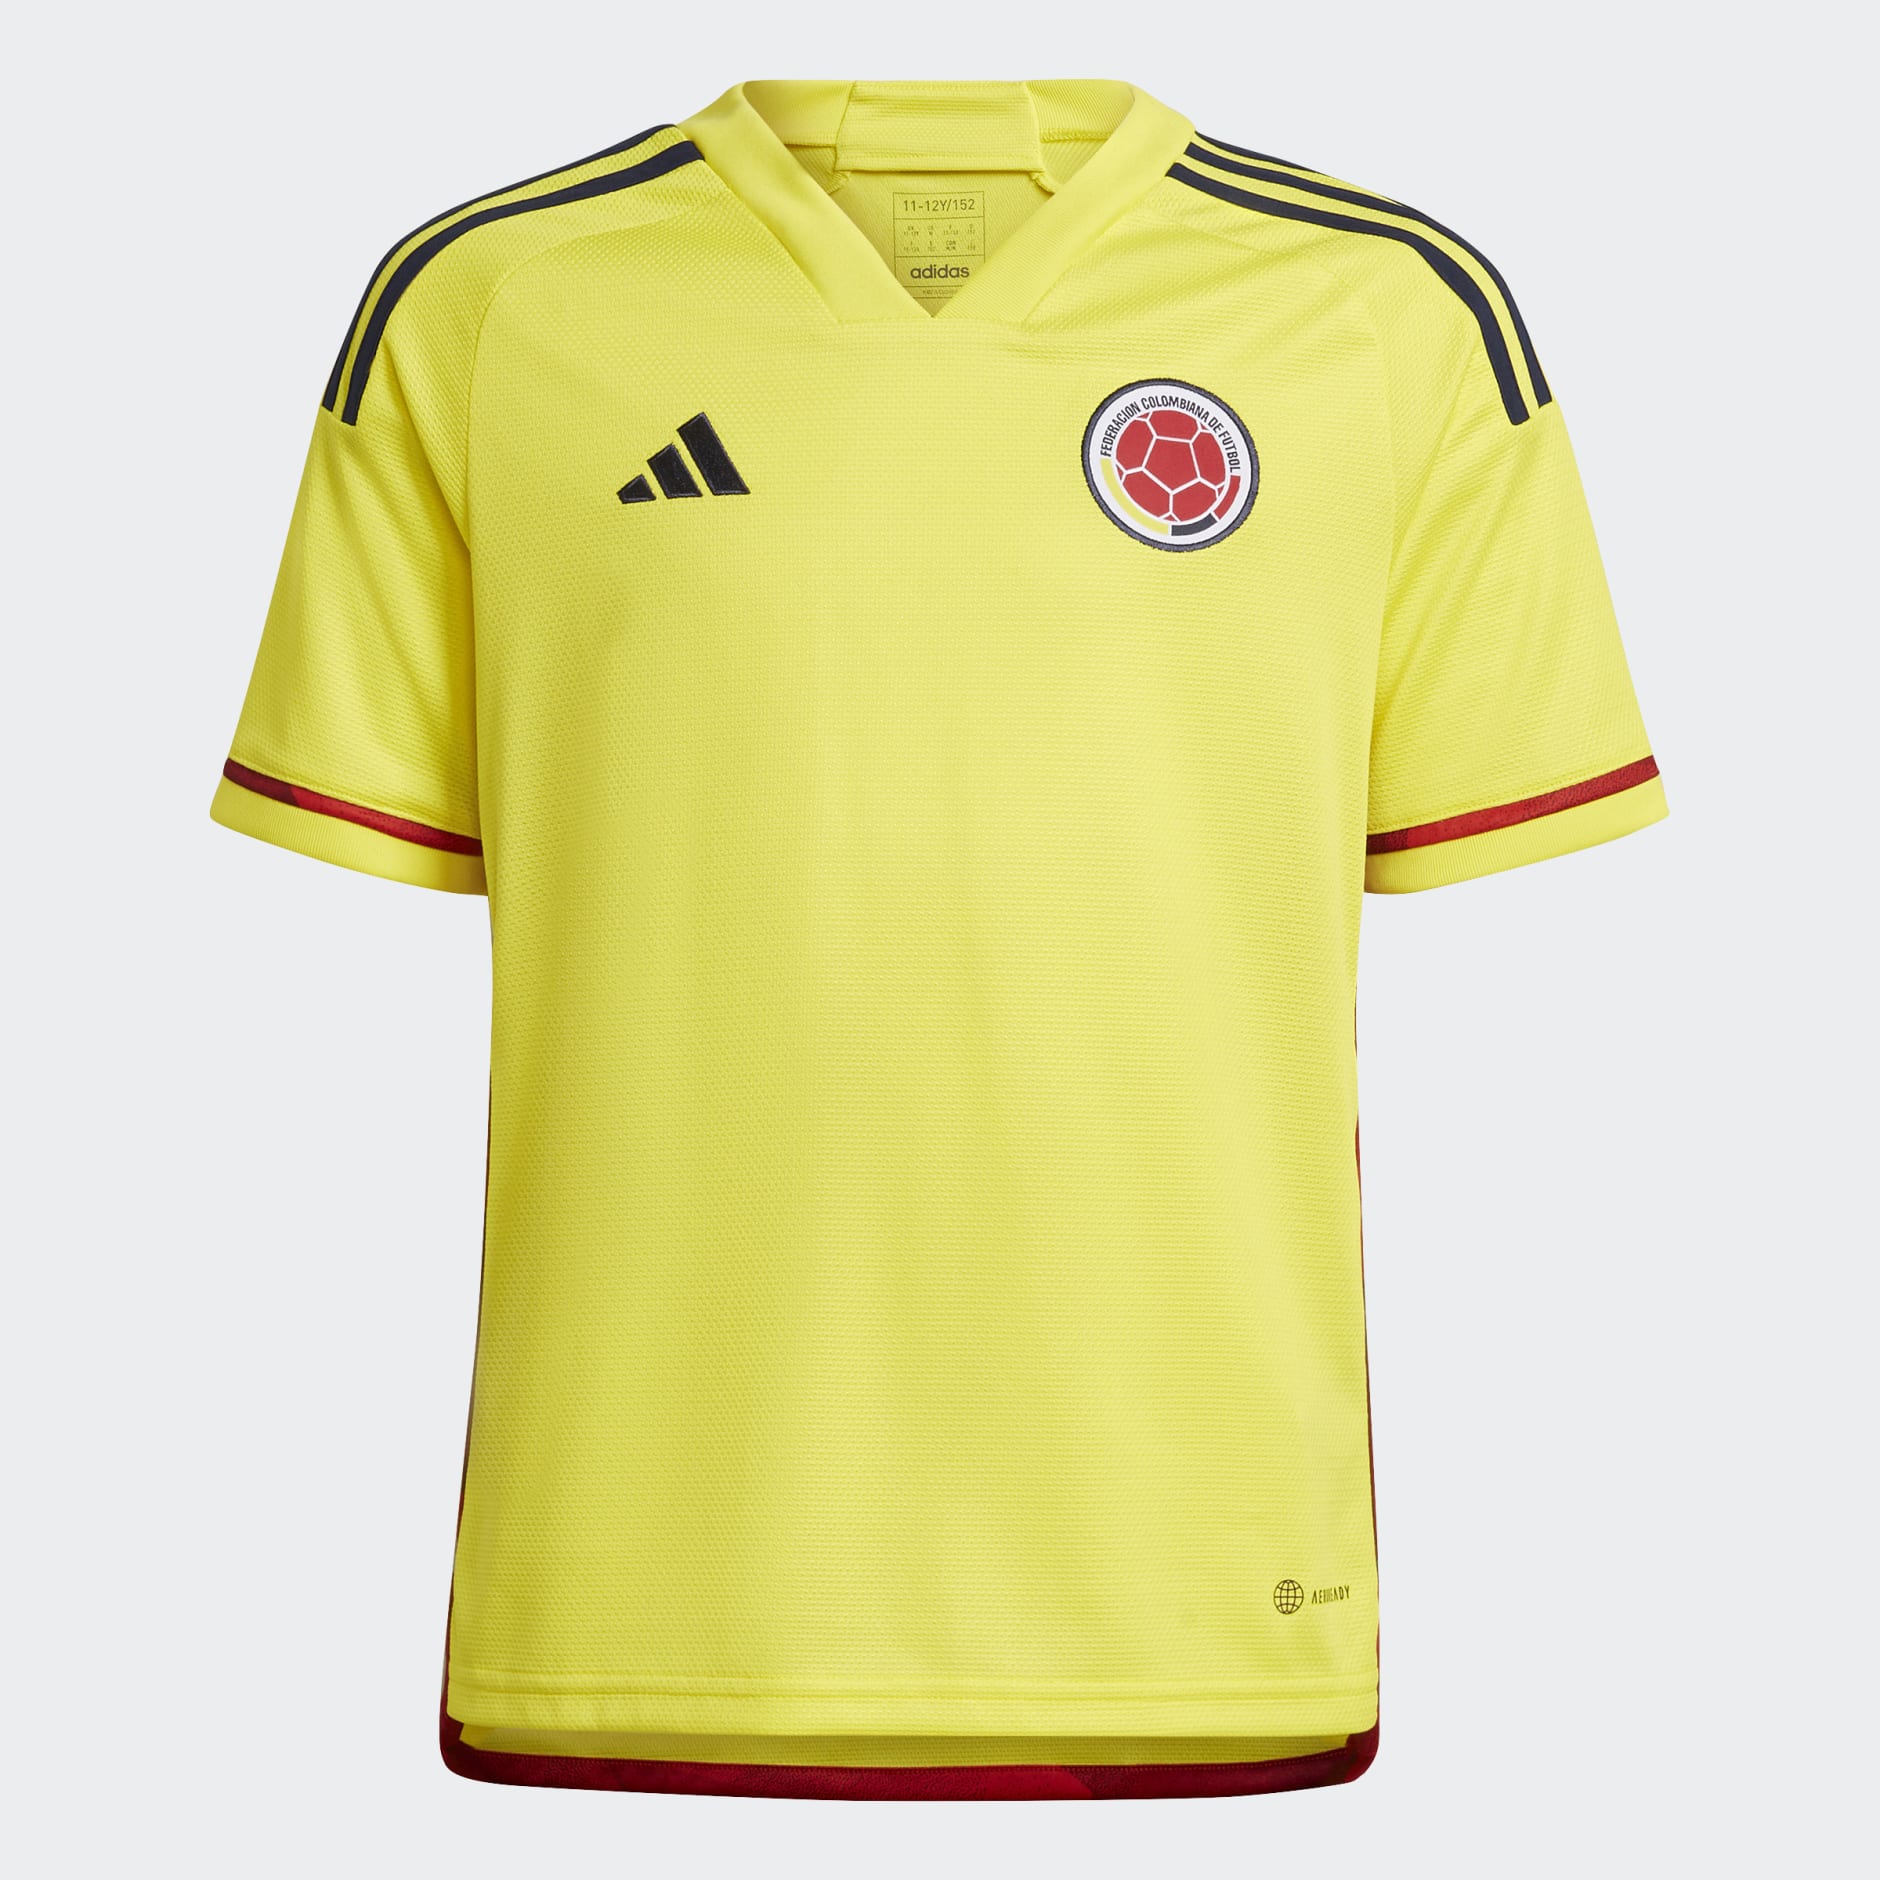 Old Colombia football shirts and soccer jerseys